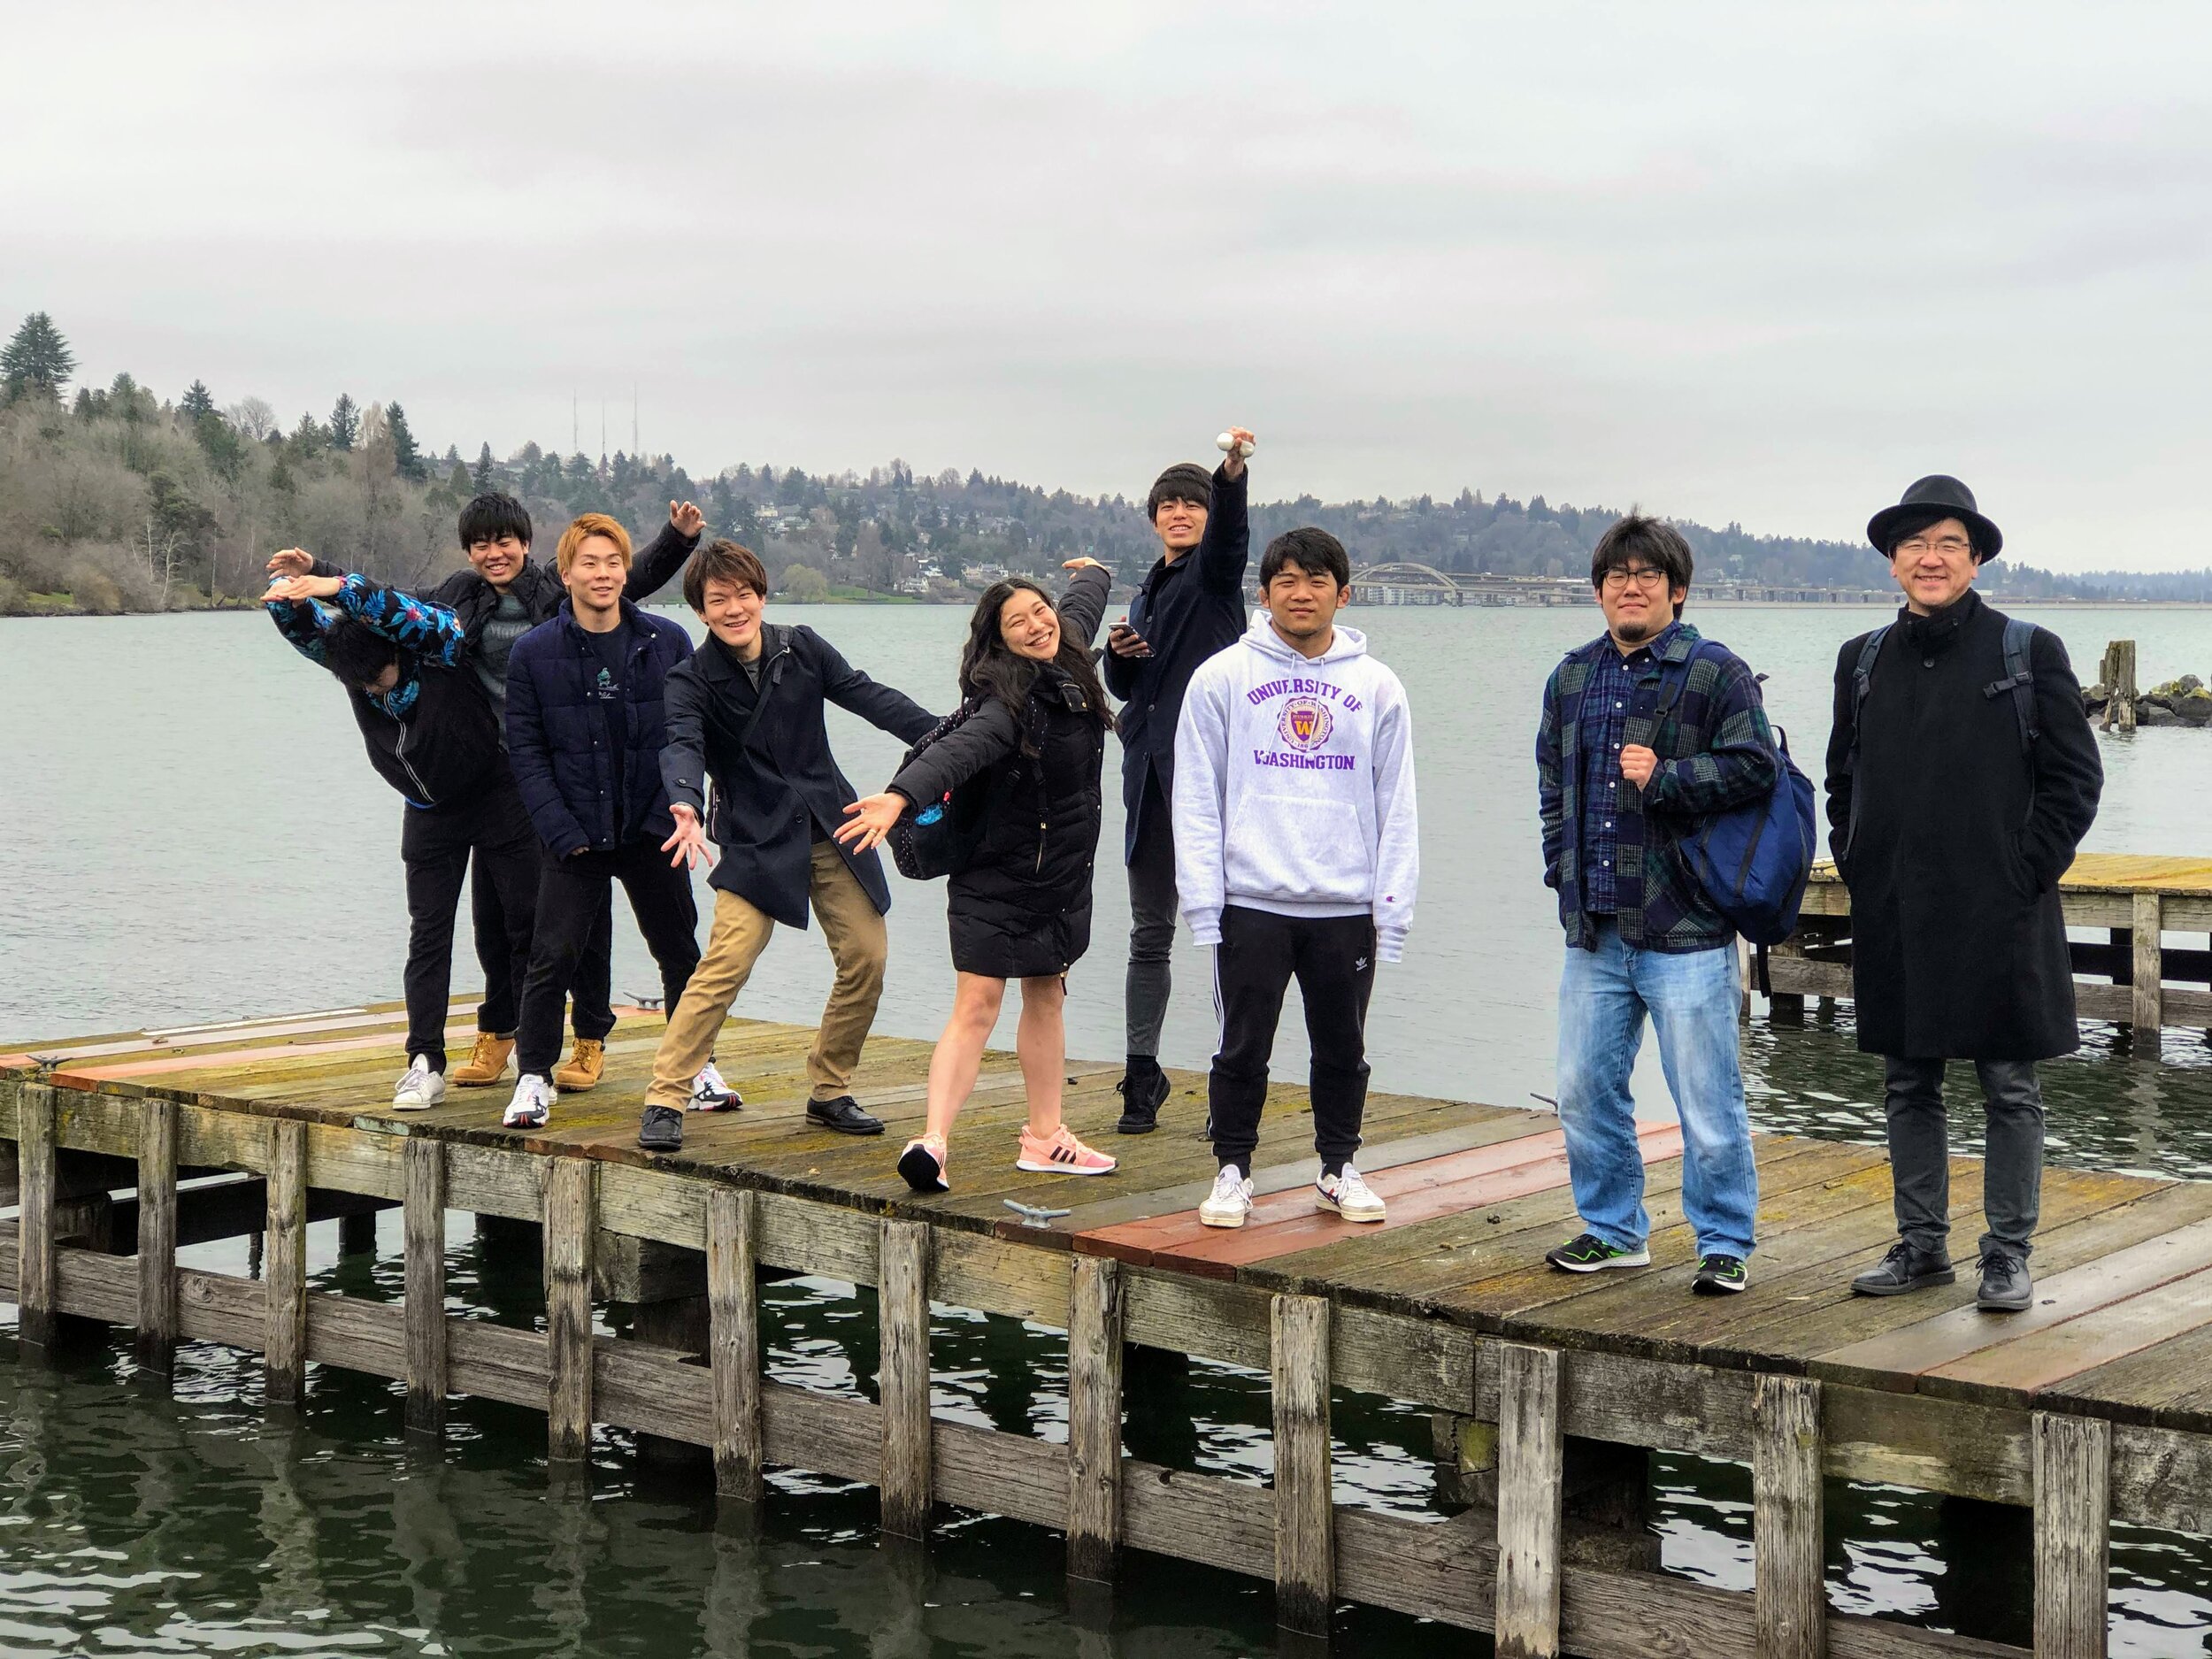 Visit to Mount Baker Rowing and Sailing Center 